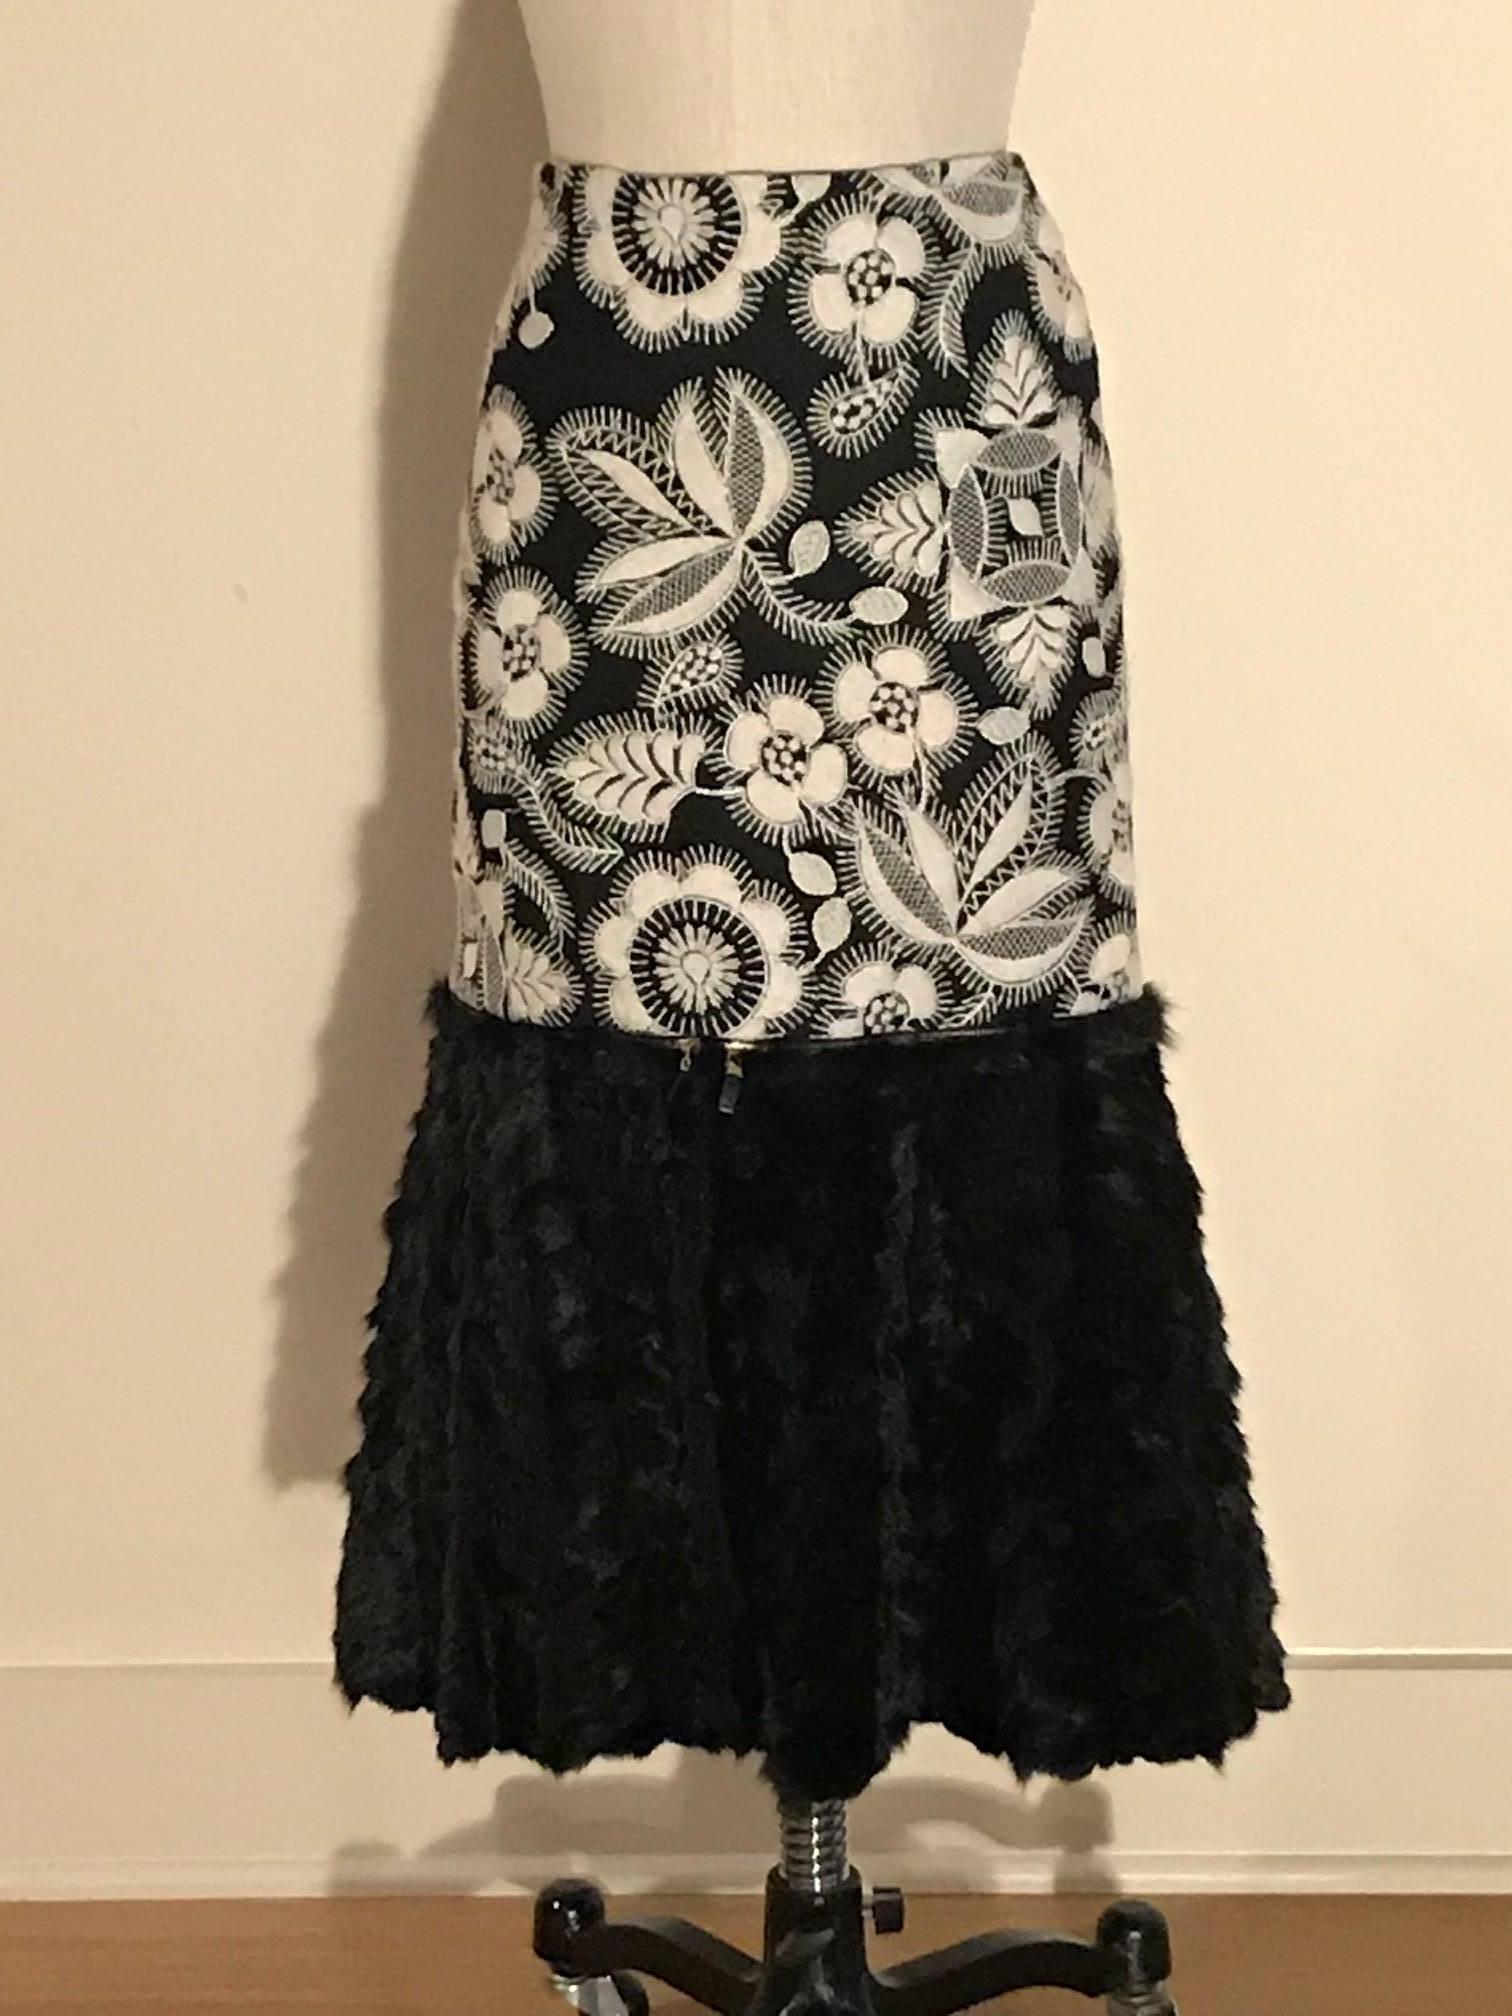 Alexander McQueen black and white floral pattern embroidered wool skirt with fur trim at bottom from his 2003 collection.. A gold zip with leather pulls runs between the wool and fur sections, so the fur can be zipped off if desired! Back zip. 

50%